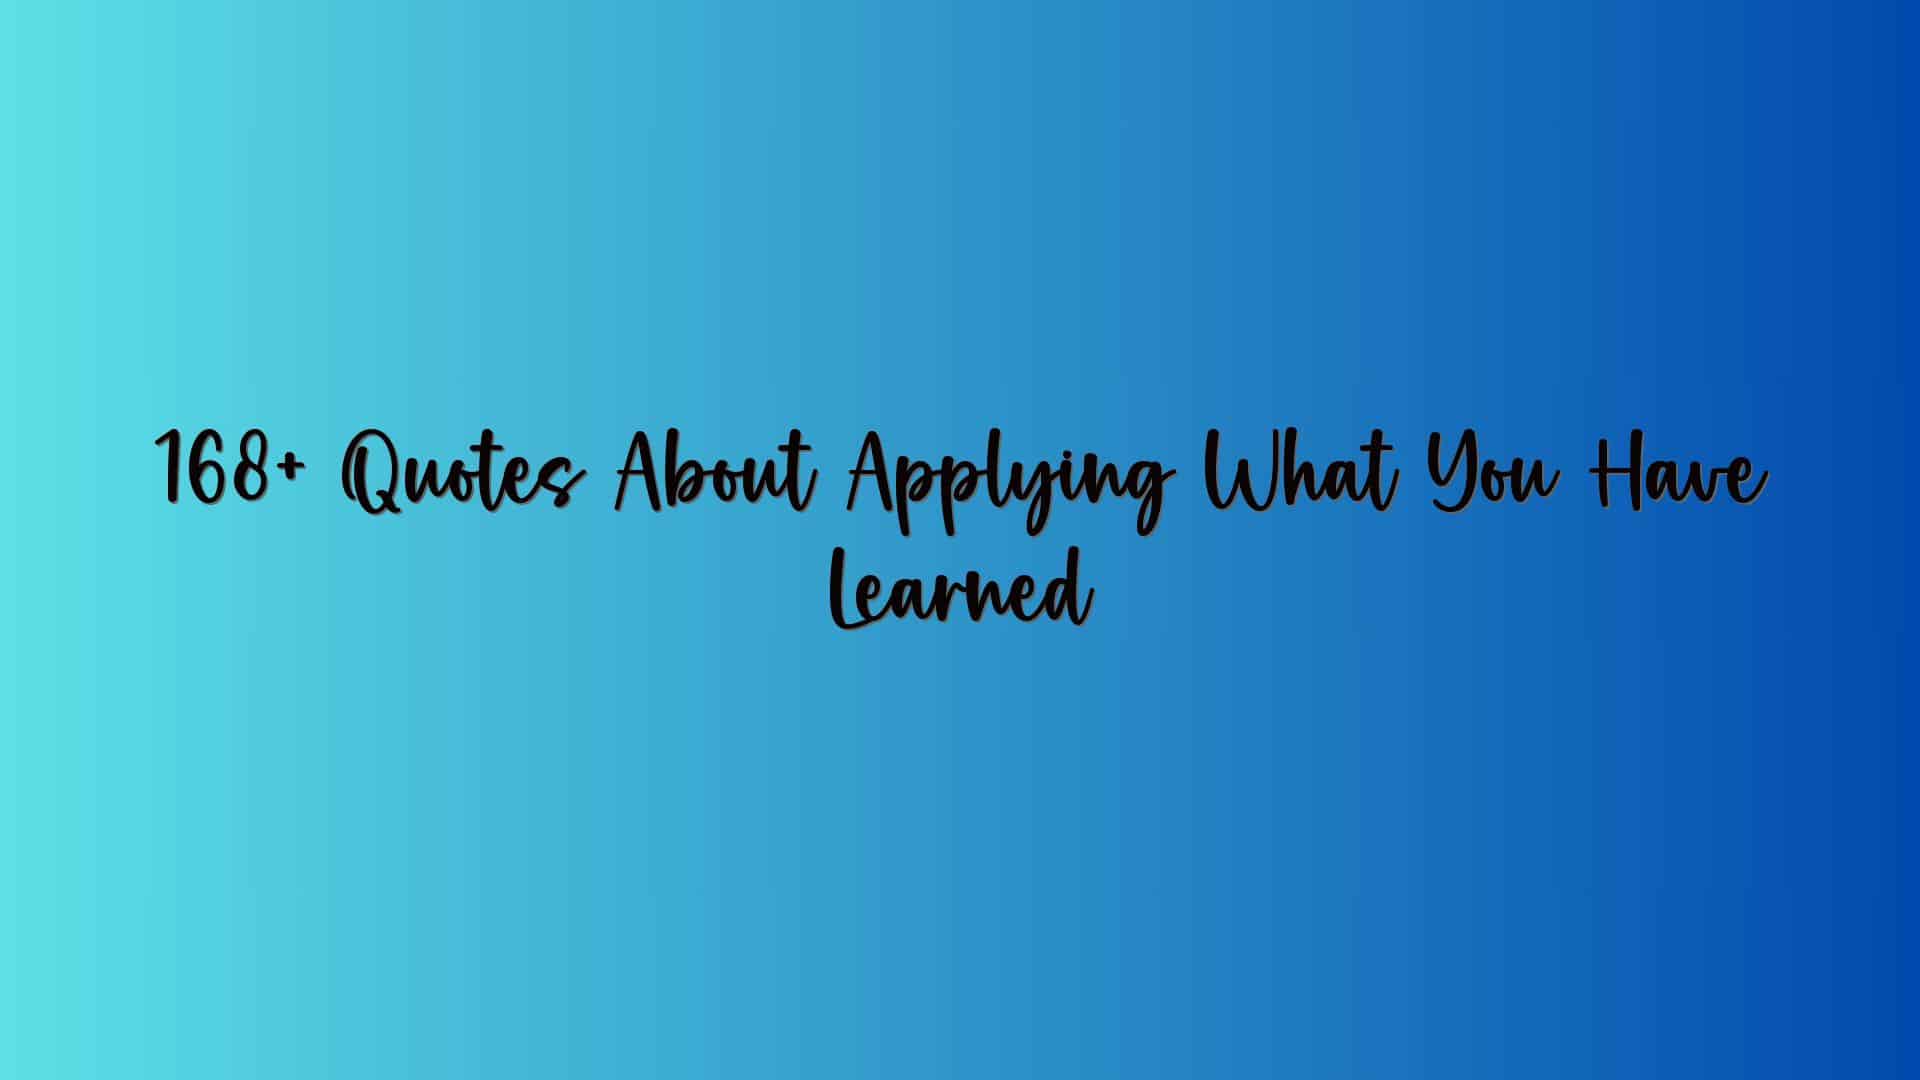 168+ Quotes About Applying What You Have Learned